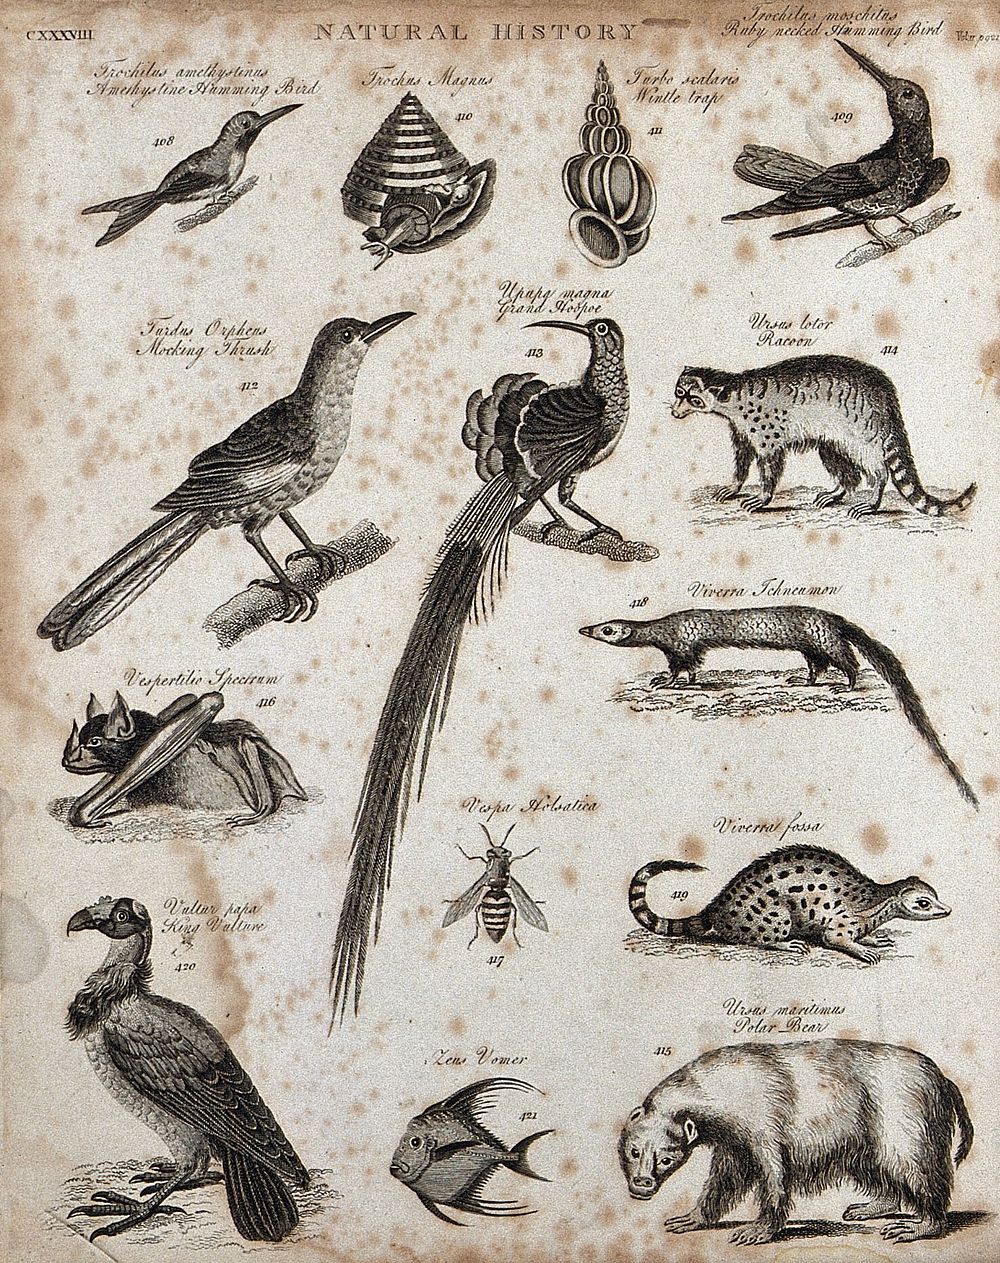 Above, two humming birds, two molluscs, a mocking thrush, a hoopoe, and a racoon; below, a bat, a wasp, two mongooses, a…